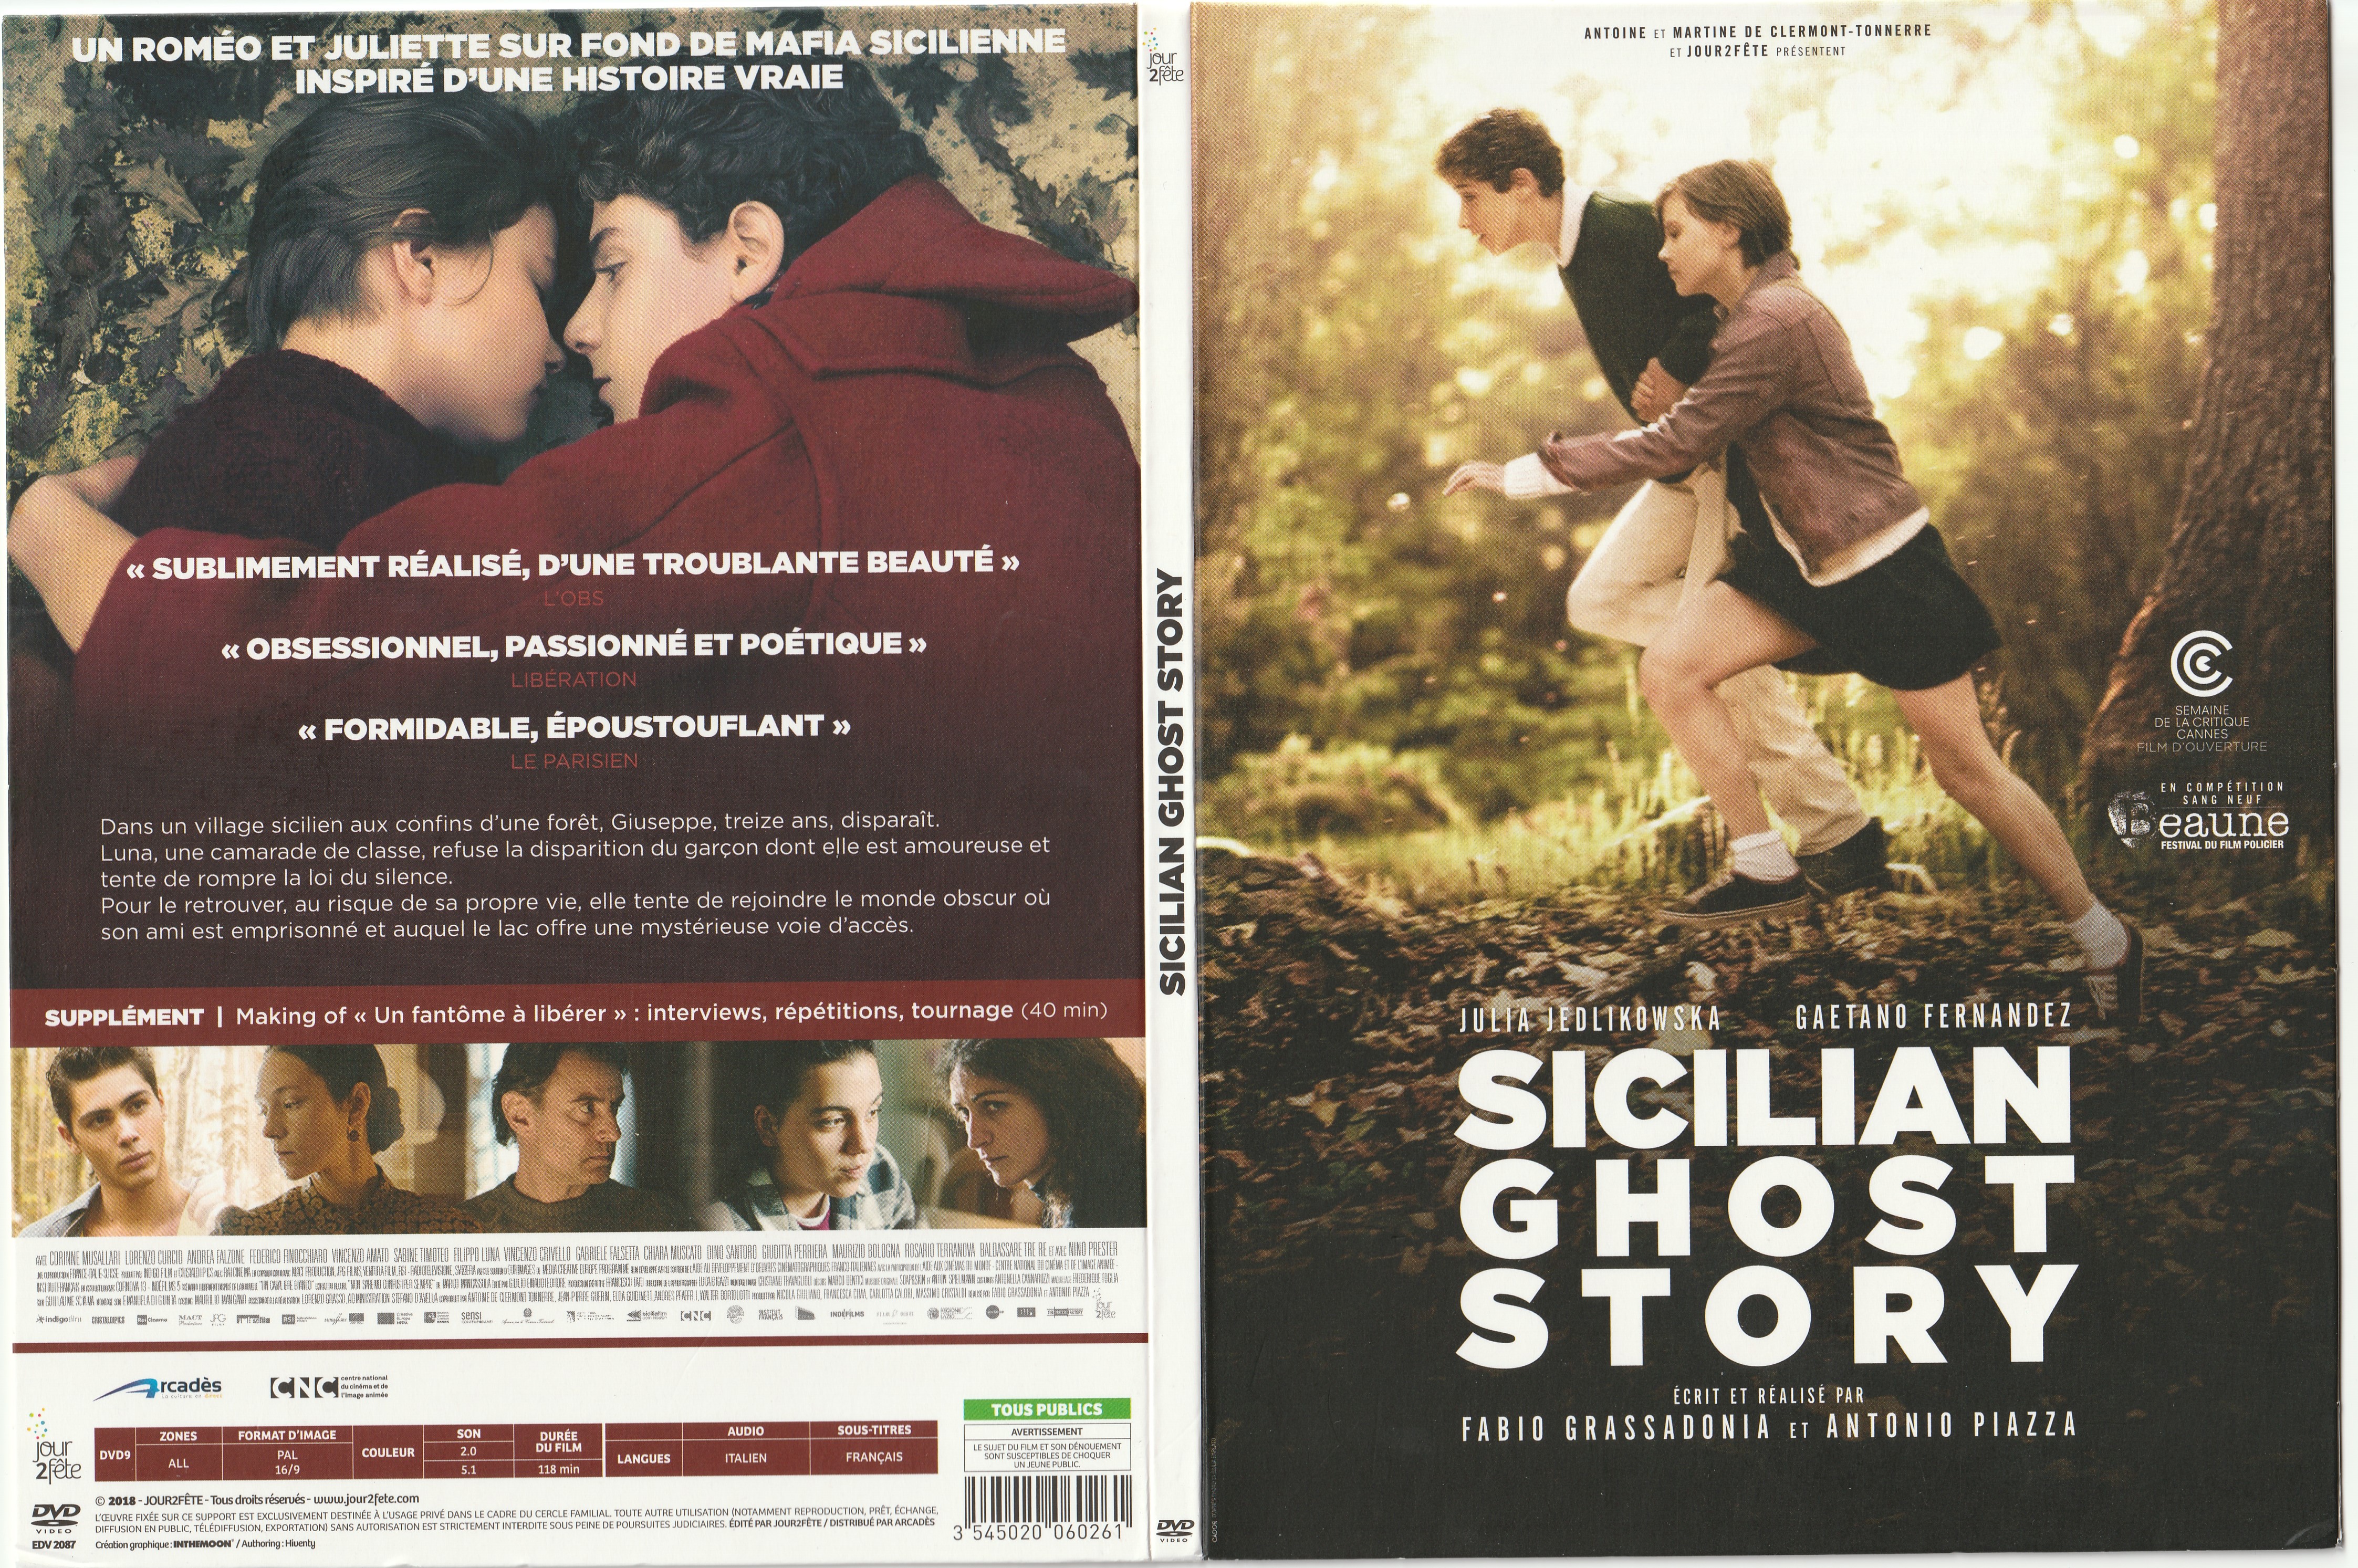 Jaquette DVD Sicilian ghost story